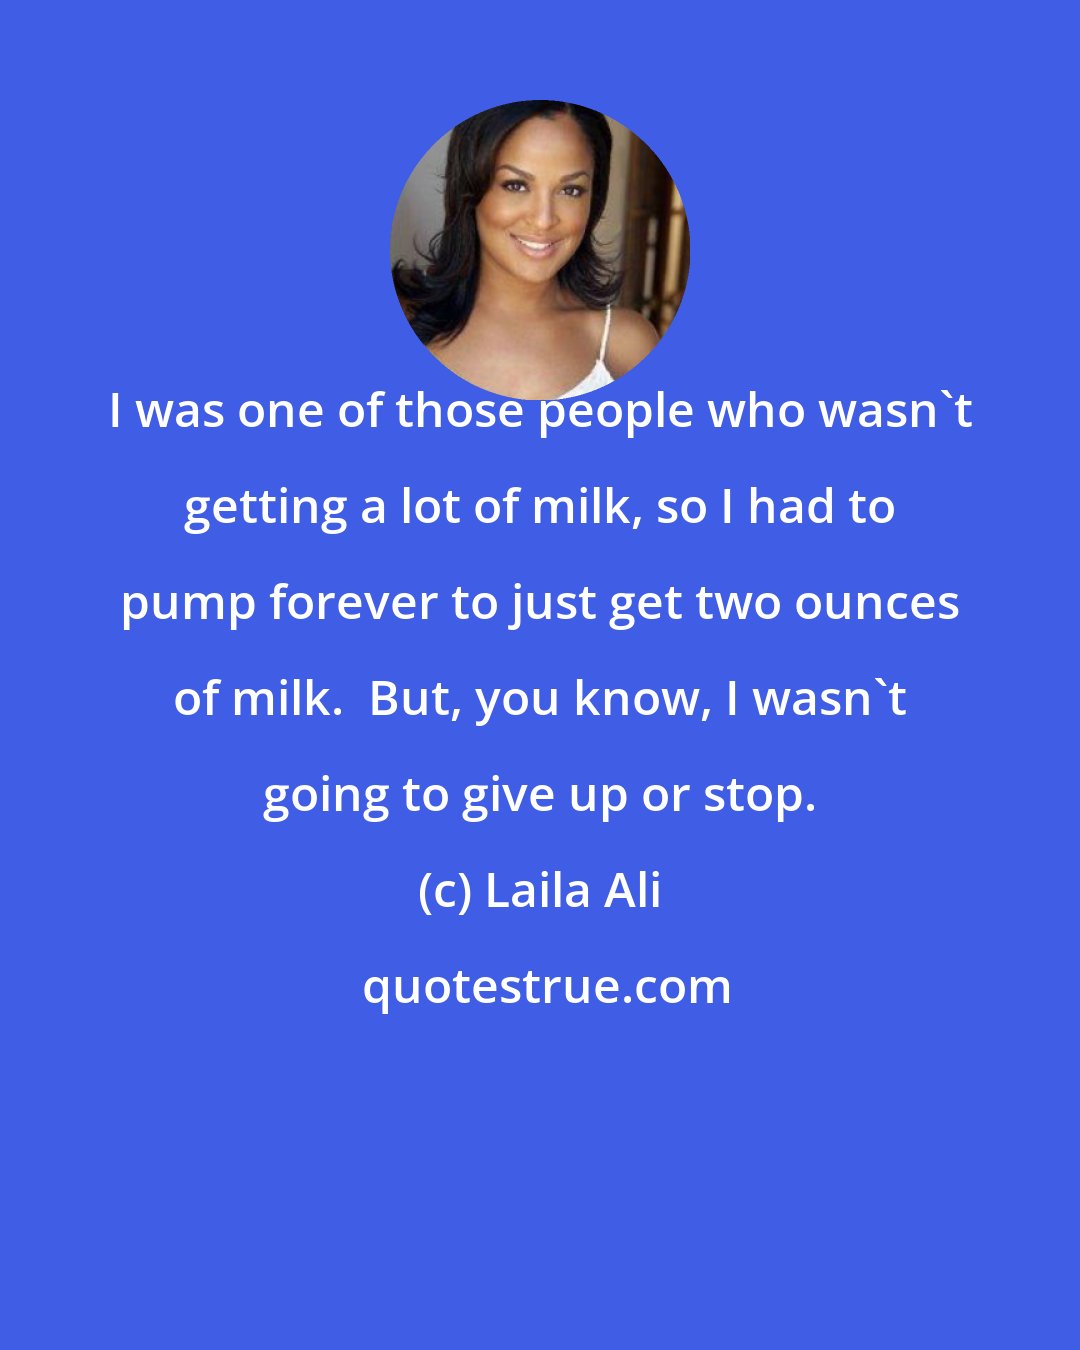 Laila Ali: I was one of those people who wasn't getting a lot of milk, so I had to pump forever to just get two ounces of milk.  But, you know, I wasn't going to give up or stop.